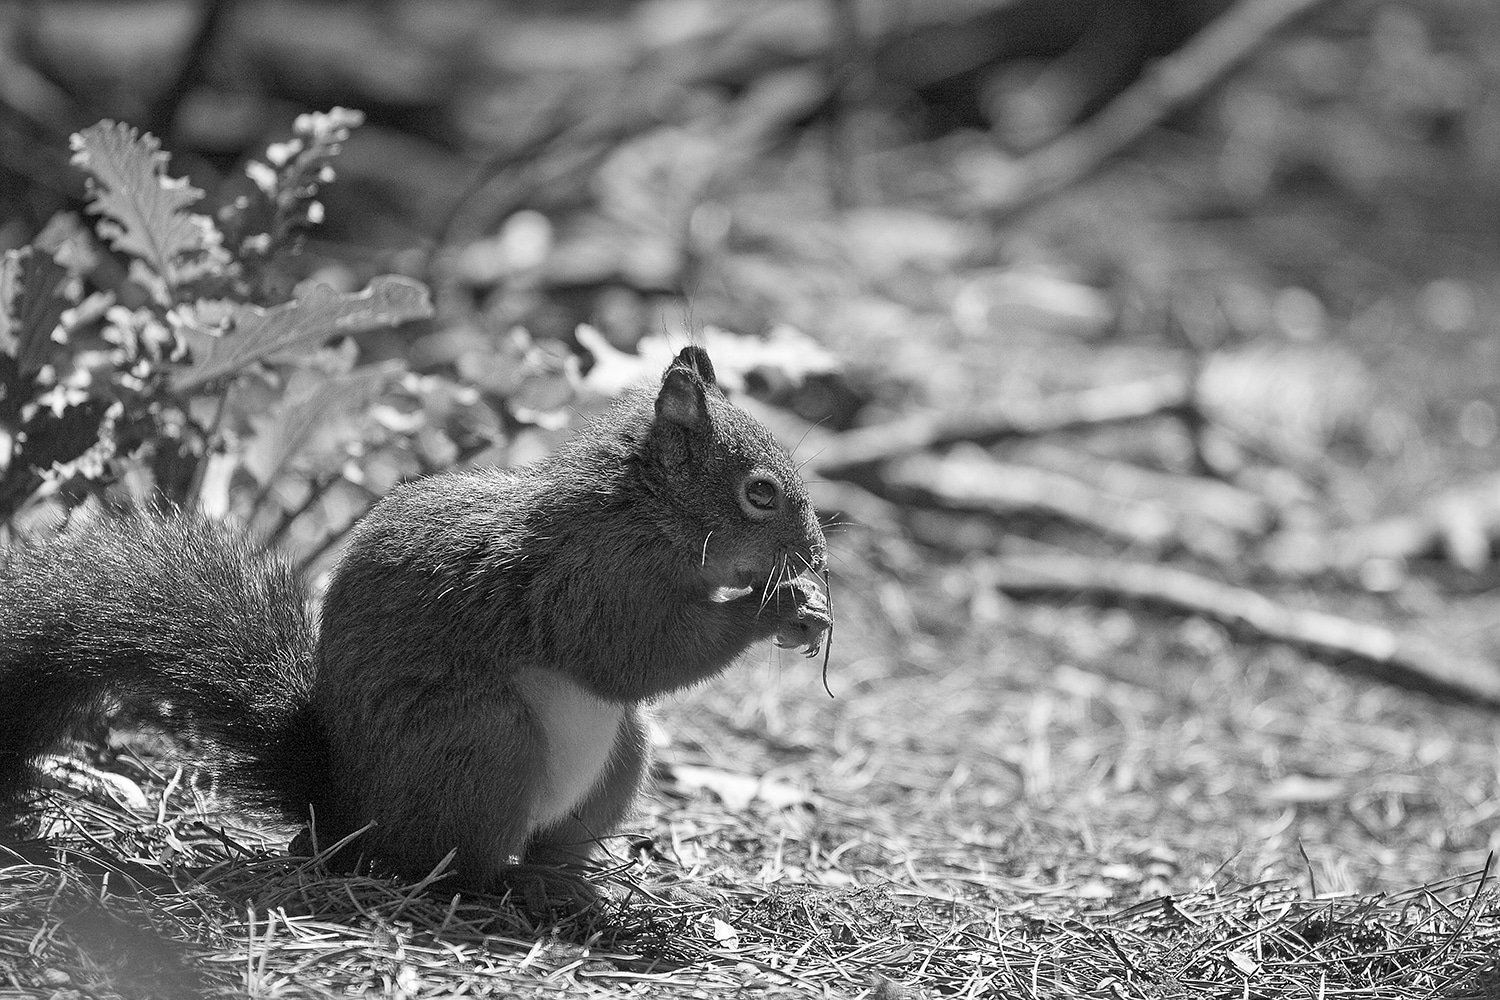 Red Squirrel at Formby Black and White Landscapes Photography Black and White 2